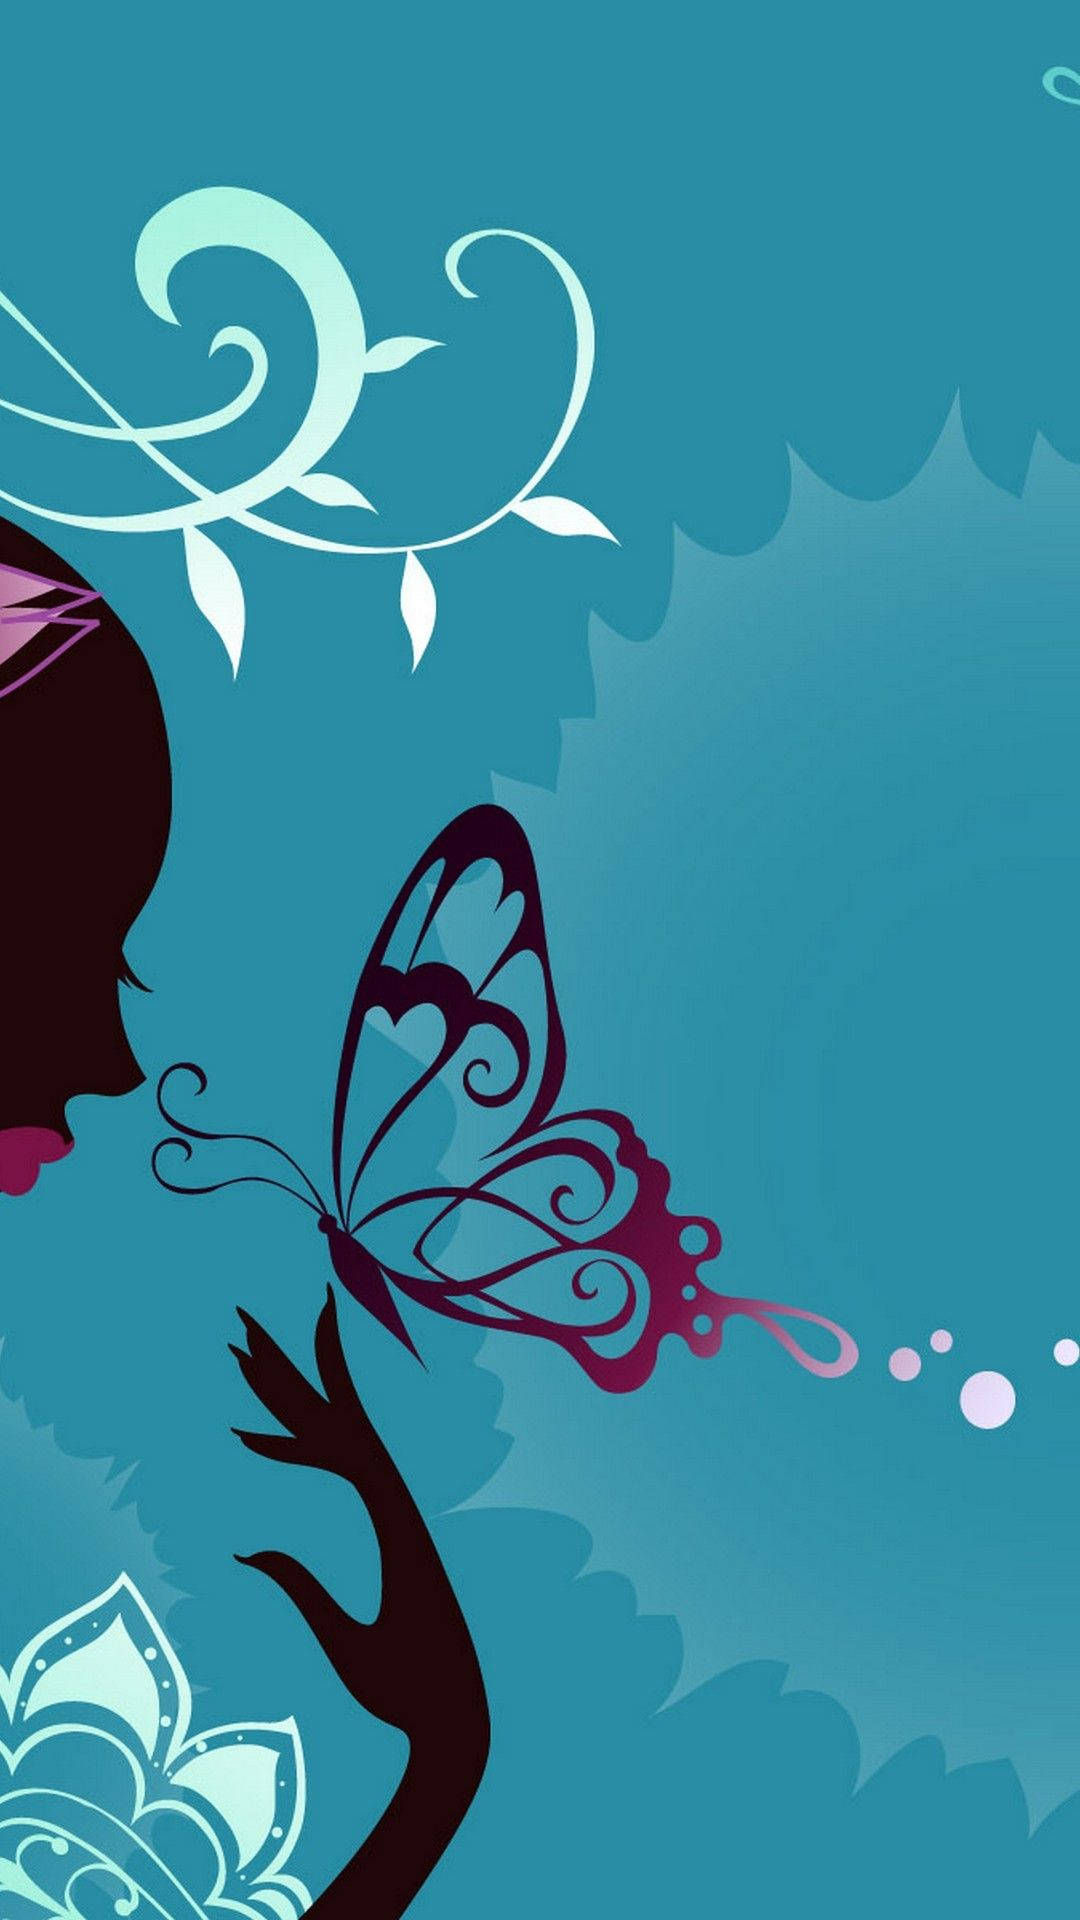 Marvelous Illustration Of Butterfly Iphone Theme Background